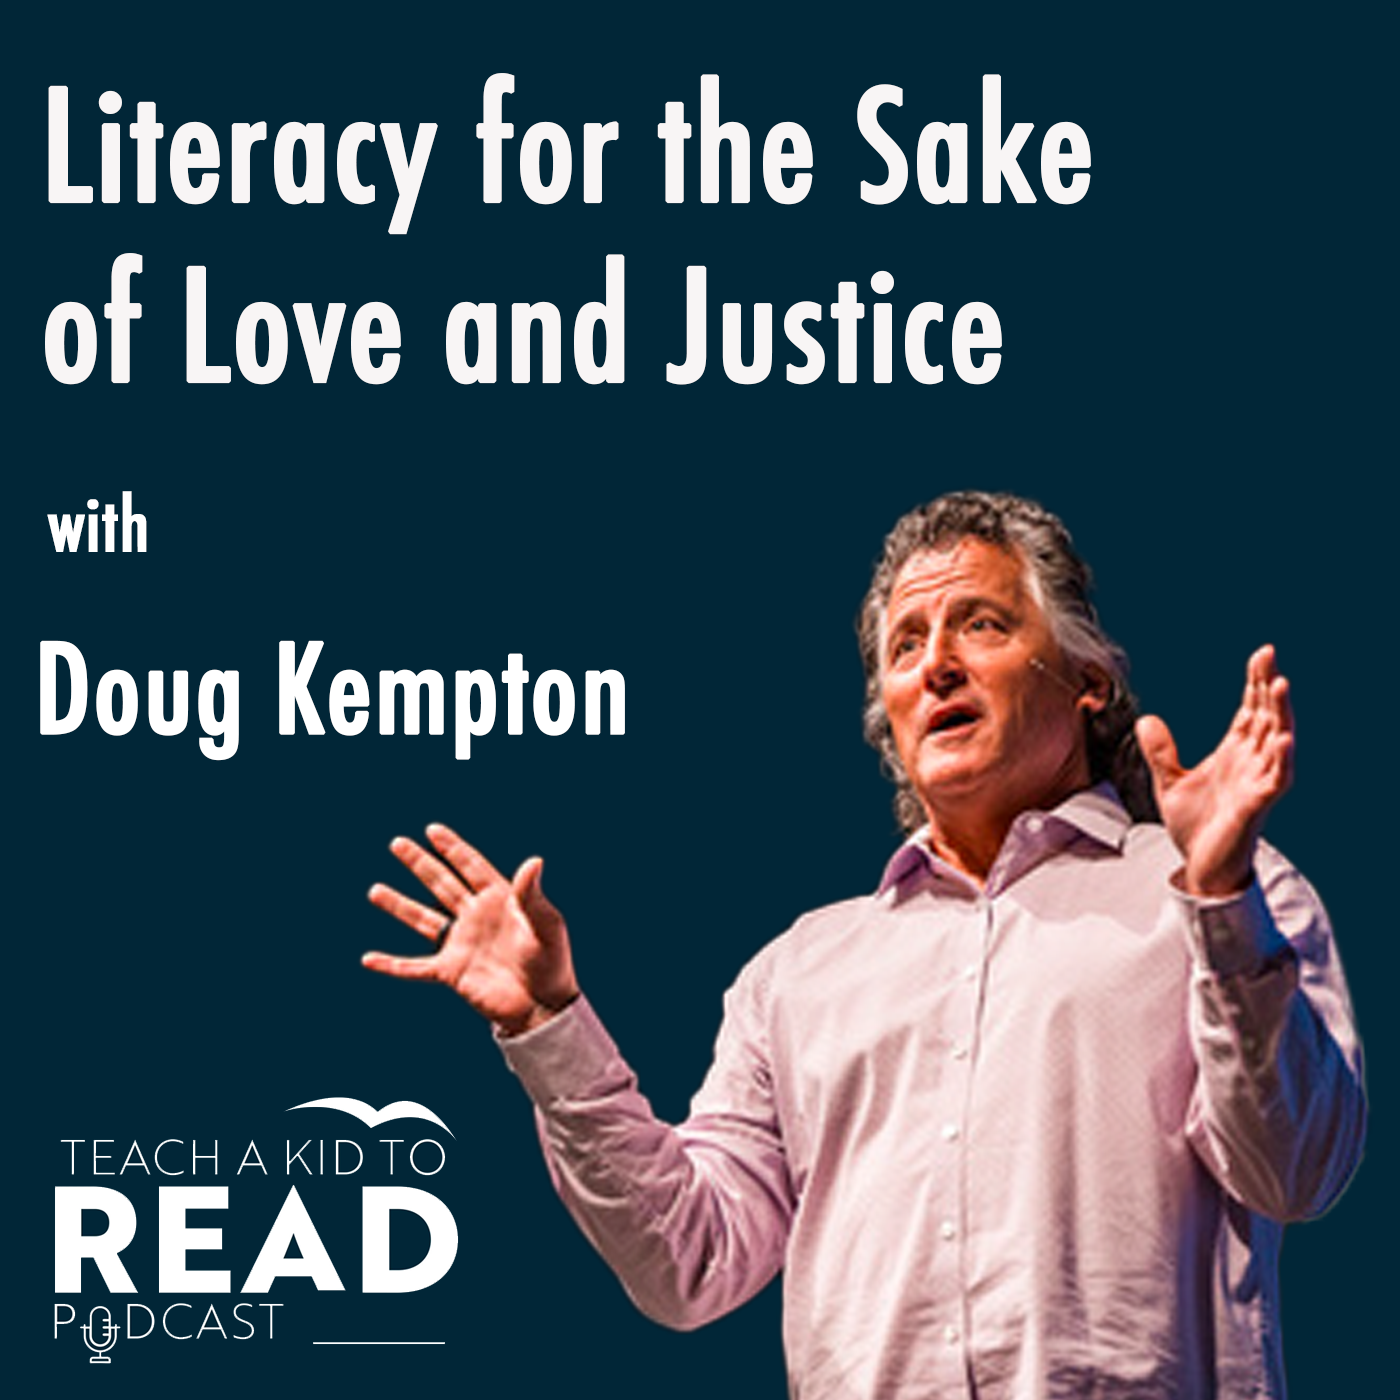 Literacy for the Sake of Love and Justice with Doug Kempton